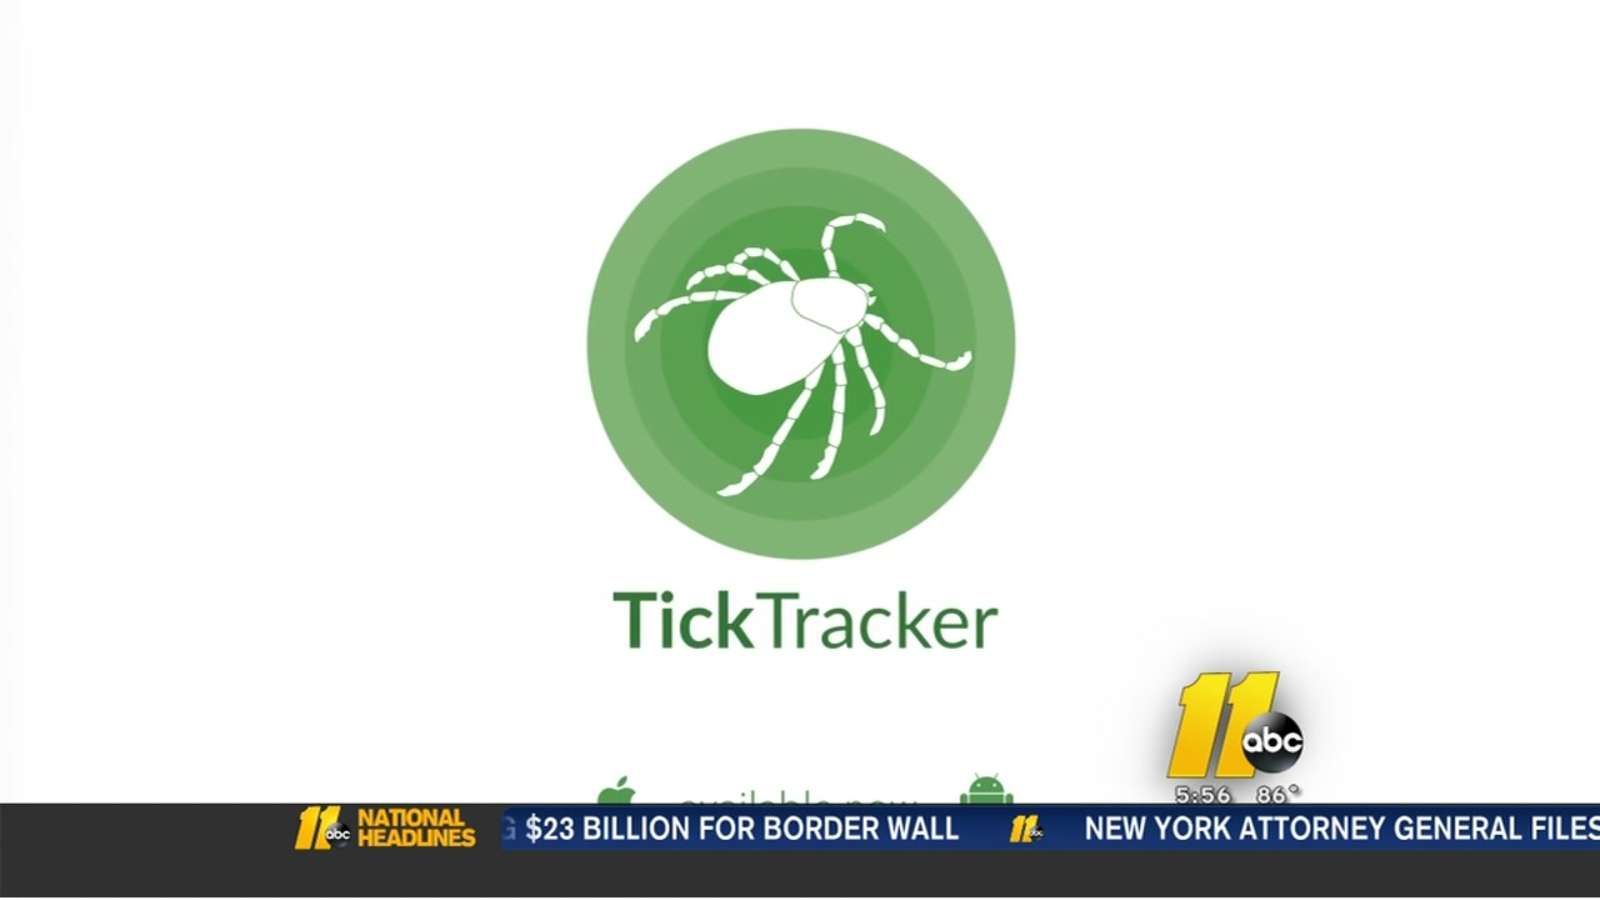 Teenager aims to track data to help cure Lyme disease ...